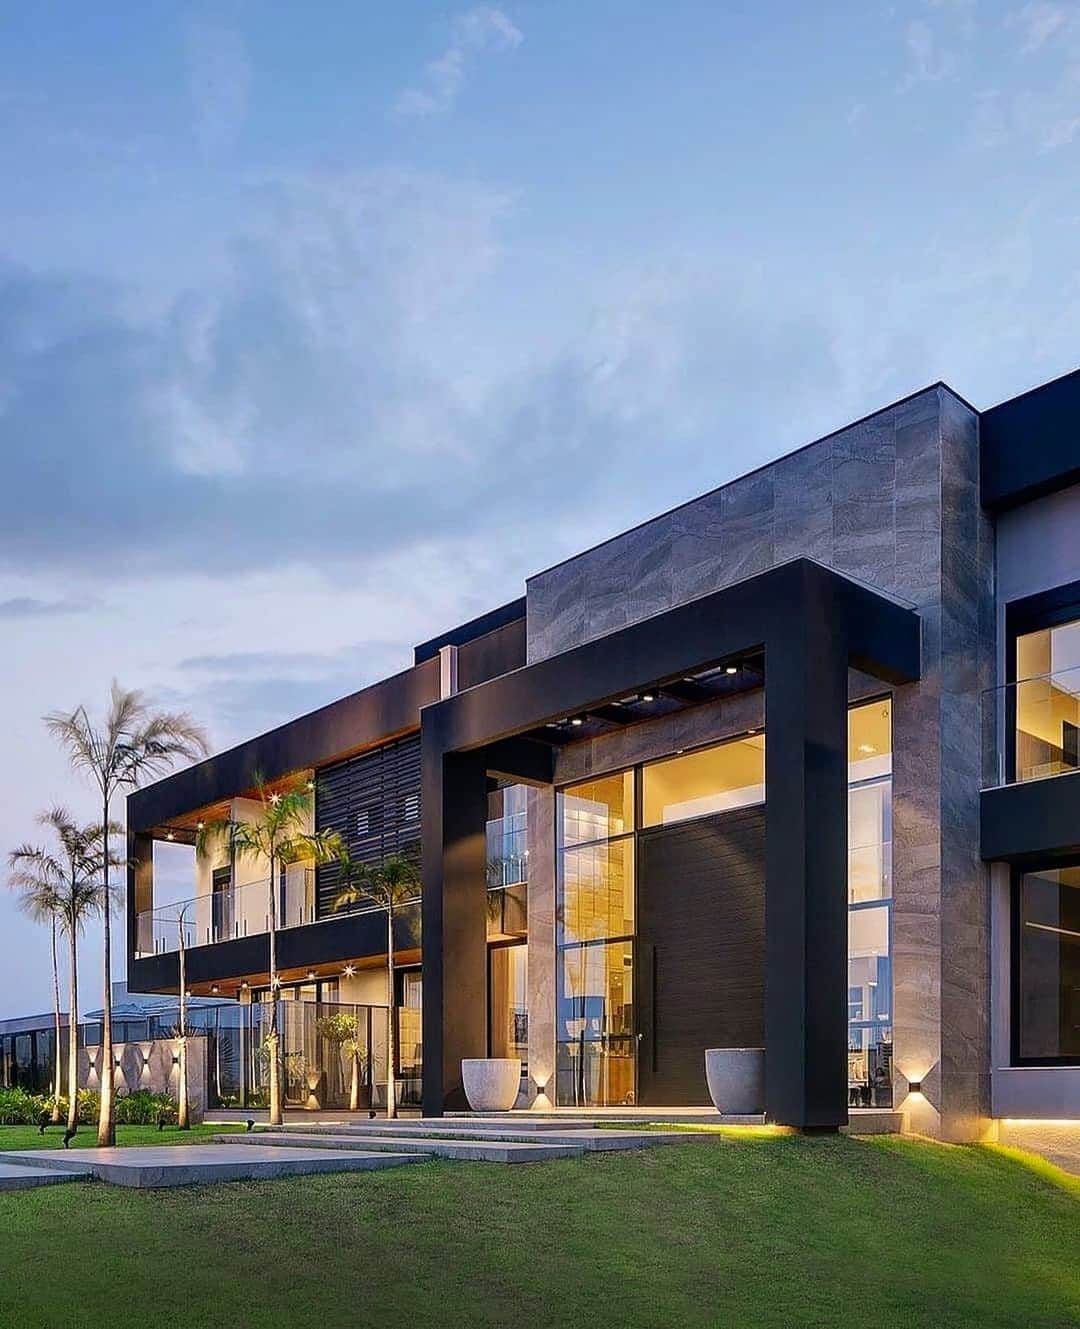 Architecture - Housesのインスタグラム：「⁣ Residential projects that make the difference, achieving the p𝗲𝗿𝗳𝗲𝗰𝘁 𝗯𝗮𝗹𝗮𝗻𝗰𝗲 𝗯𝗲𝘁𝘄𝗲𝗲𝗻 𝗺𝗼𝗱𝗲𝗿𝗻𝗶𝘁𝘆 𝗮𝗻𝗱 𝘀𝗼𝗽𝗵𝗶𝘀𝘁𝗶𝗰𝗮𝘁𝗶𝗼𝗻 ❤️❤️⁣ ⁣ This home in Condomínio Villa Jardim achieves a 100% timeless aesthetic without neglecting luxury and comfort. Leave your thoughts below 👇👇⁣⁣ _____⁣⁣⁣⁣⁣⁣⁣⁣⁣⁣⁣ 📐  @ferdelamonica⁣ 📸  @fellipelima.fotografia⁣ 📍Condomínio Villa Jardim⁣ #archidesignhome⁣⁣⁣⁣⁣⁣⁣ _____⁣⁣⁣⁣⁣⁣⁣⁣⁣⁣⁣ #design #architecture #architect #arquitectura #luxury #architettura #archilovers ‎#architecturephotography #amazingarchitecture⁣ #lookingup_architecture #artdepartment #architecturallighting #house #archimodel #architecture_addicted #architecturedaily #arqlovers」